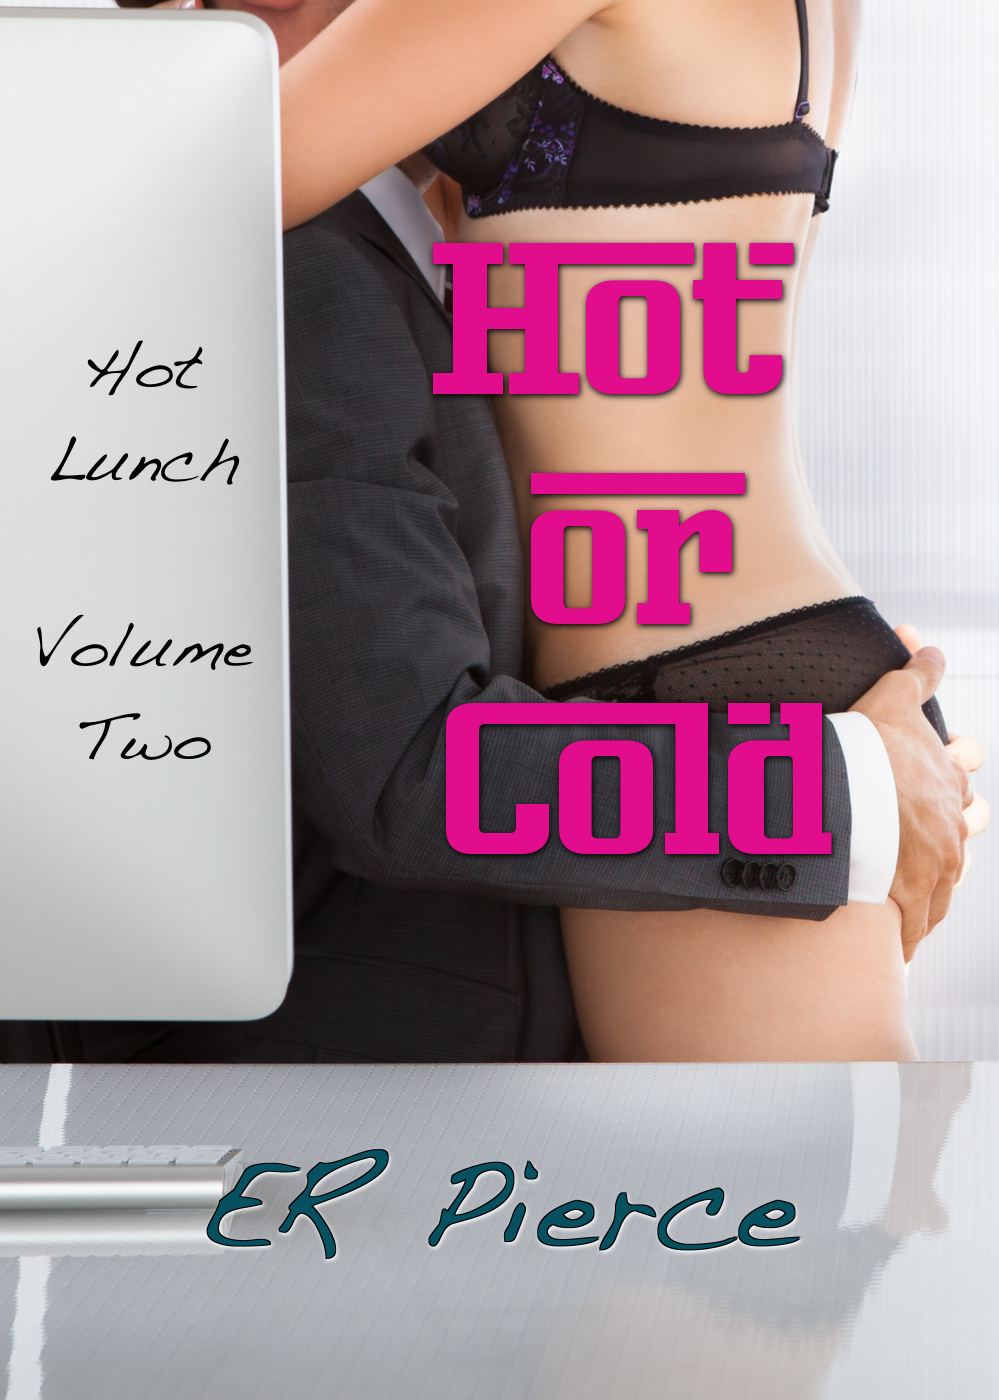 Hot or Cold (Hot Lunch #2)